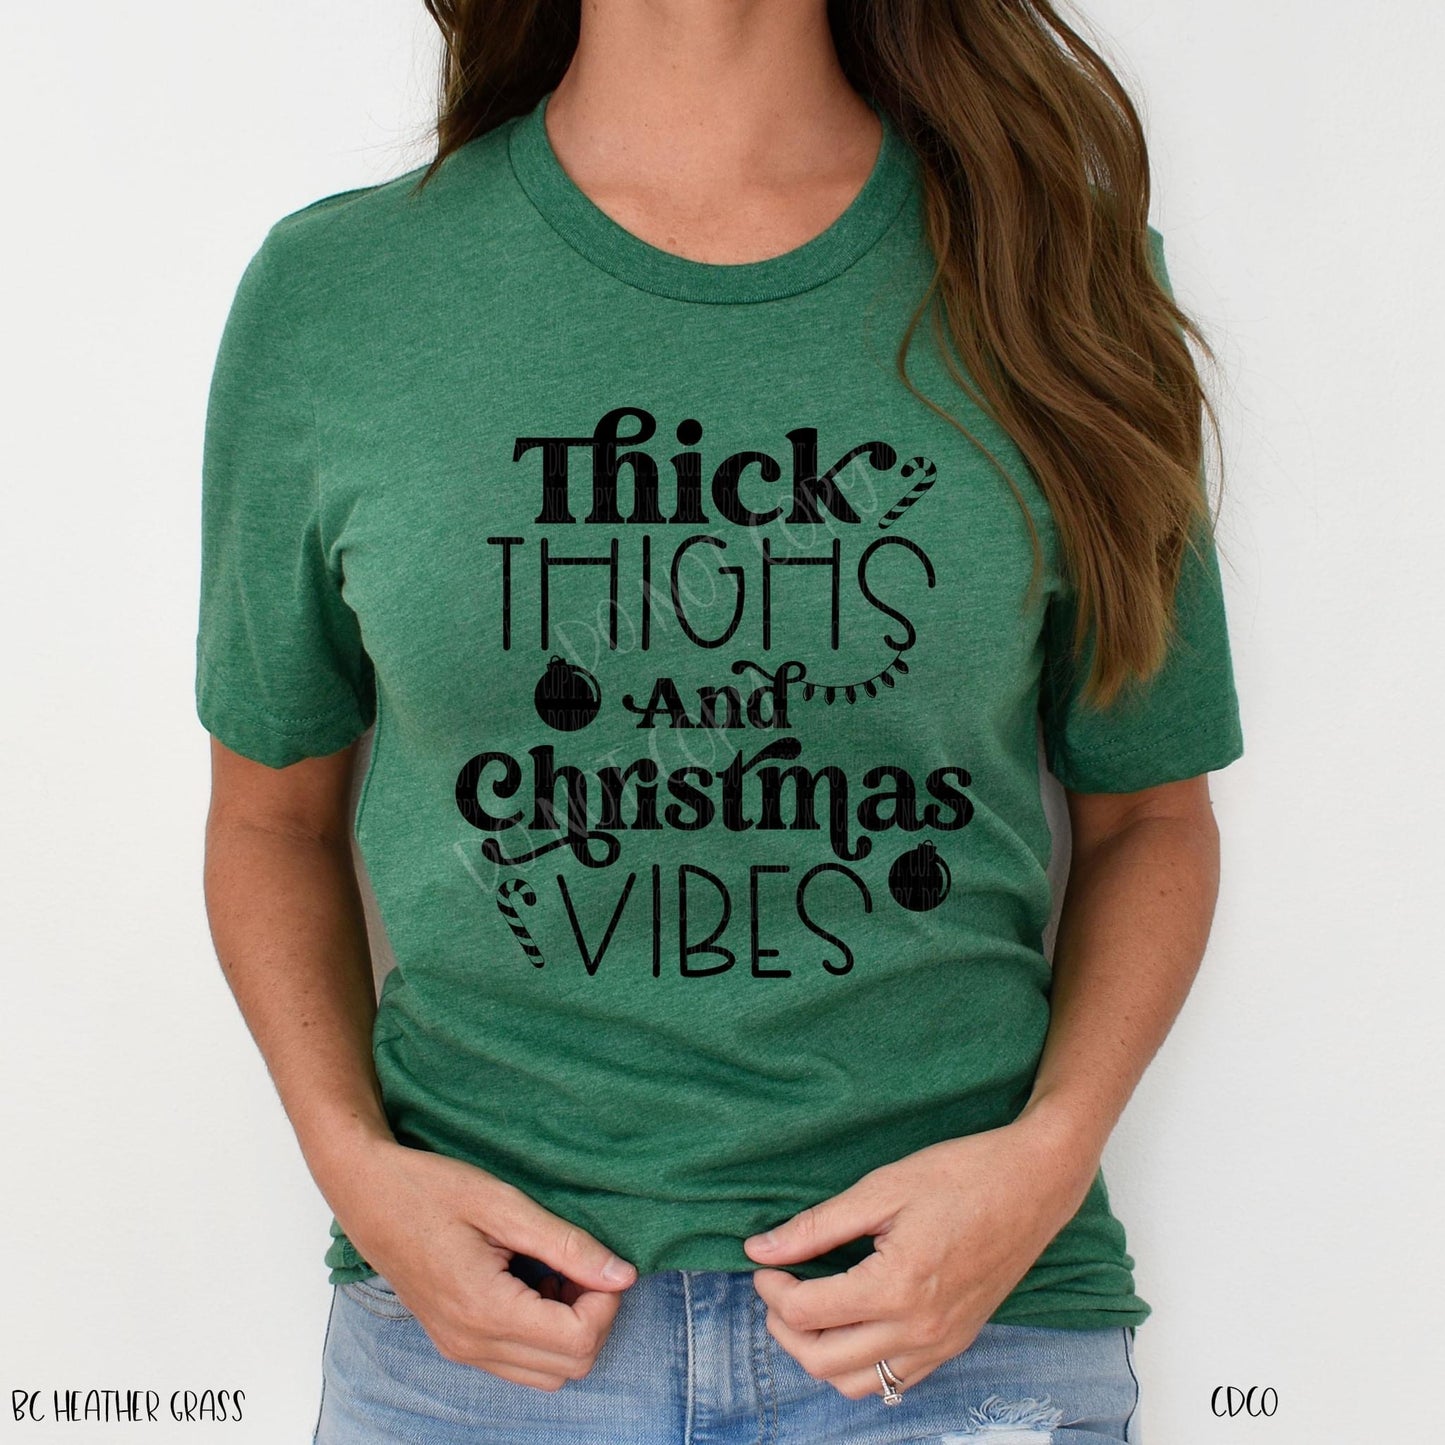 Thick Thighs and Christmas Vibes (325°)